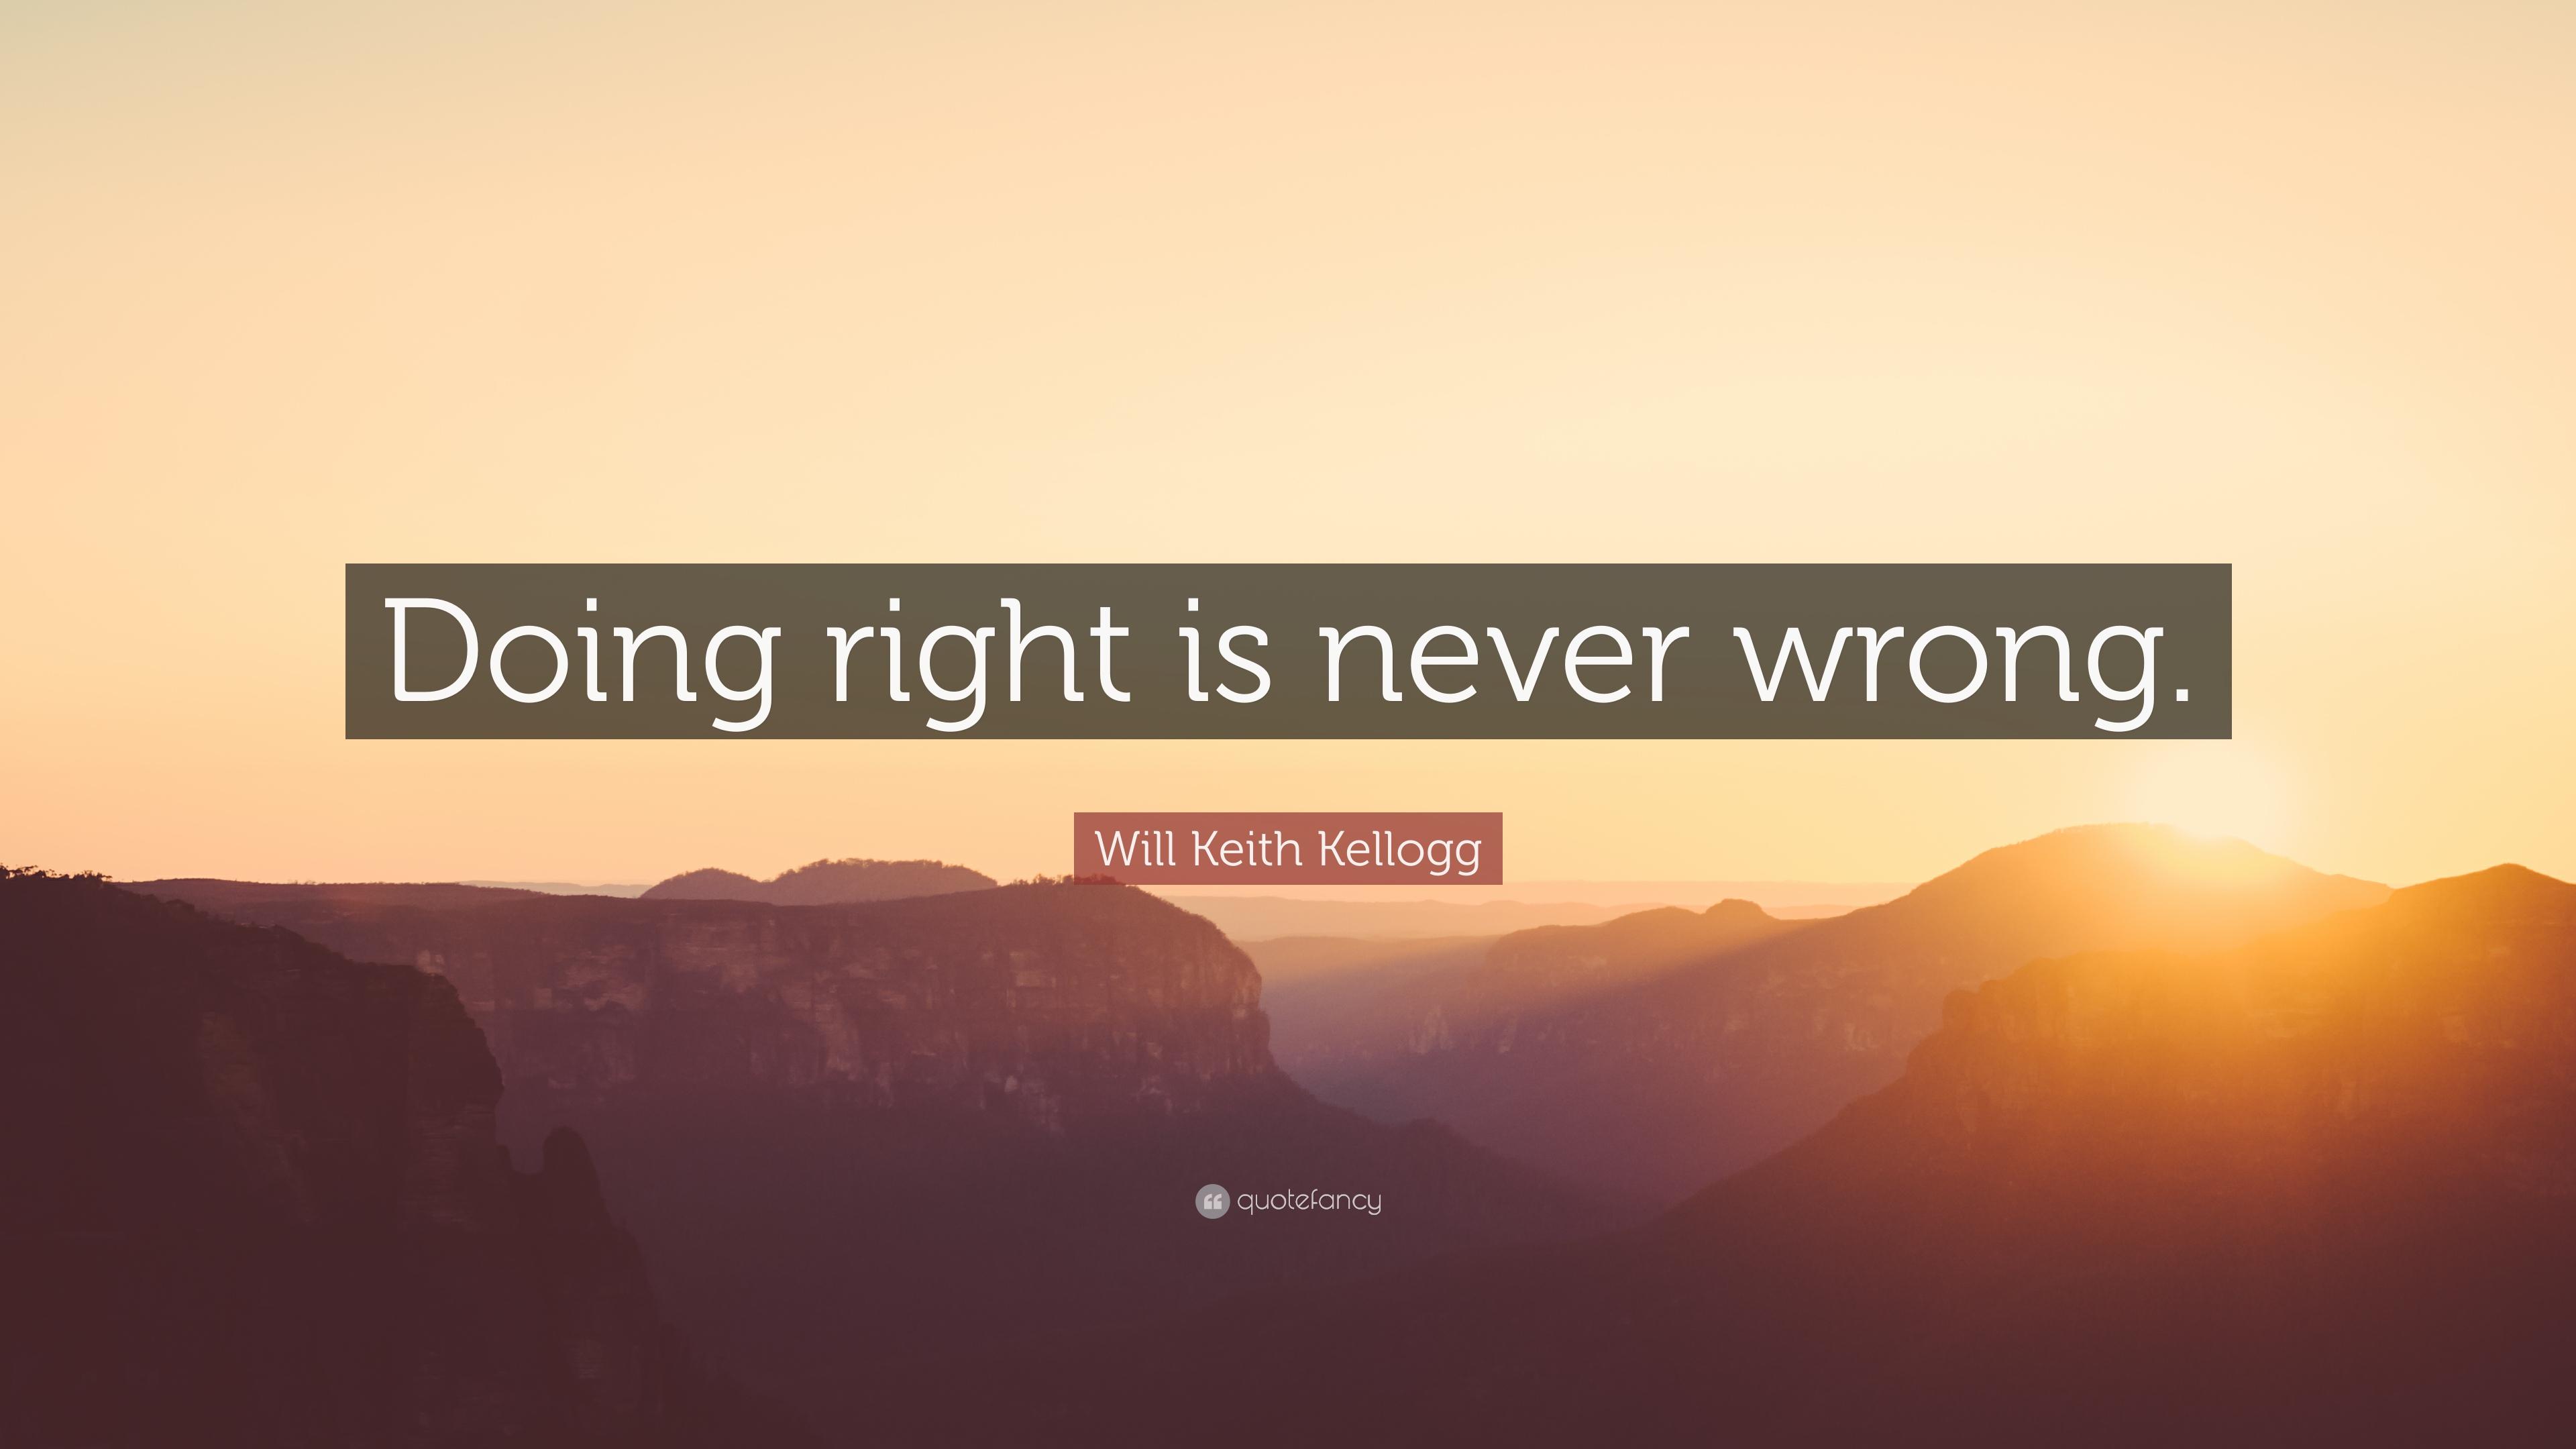 Will Keith Kellogg Quote: “Doing right is never wrong.” 7